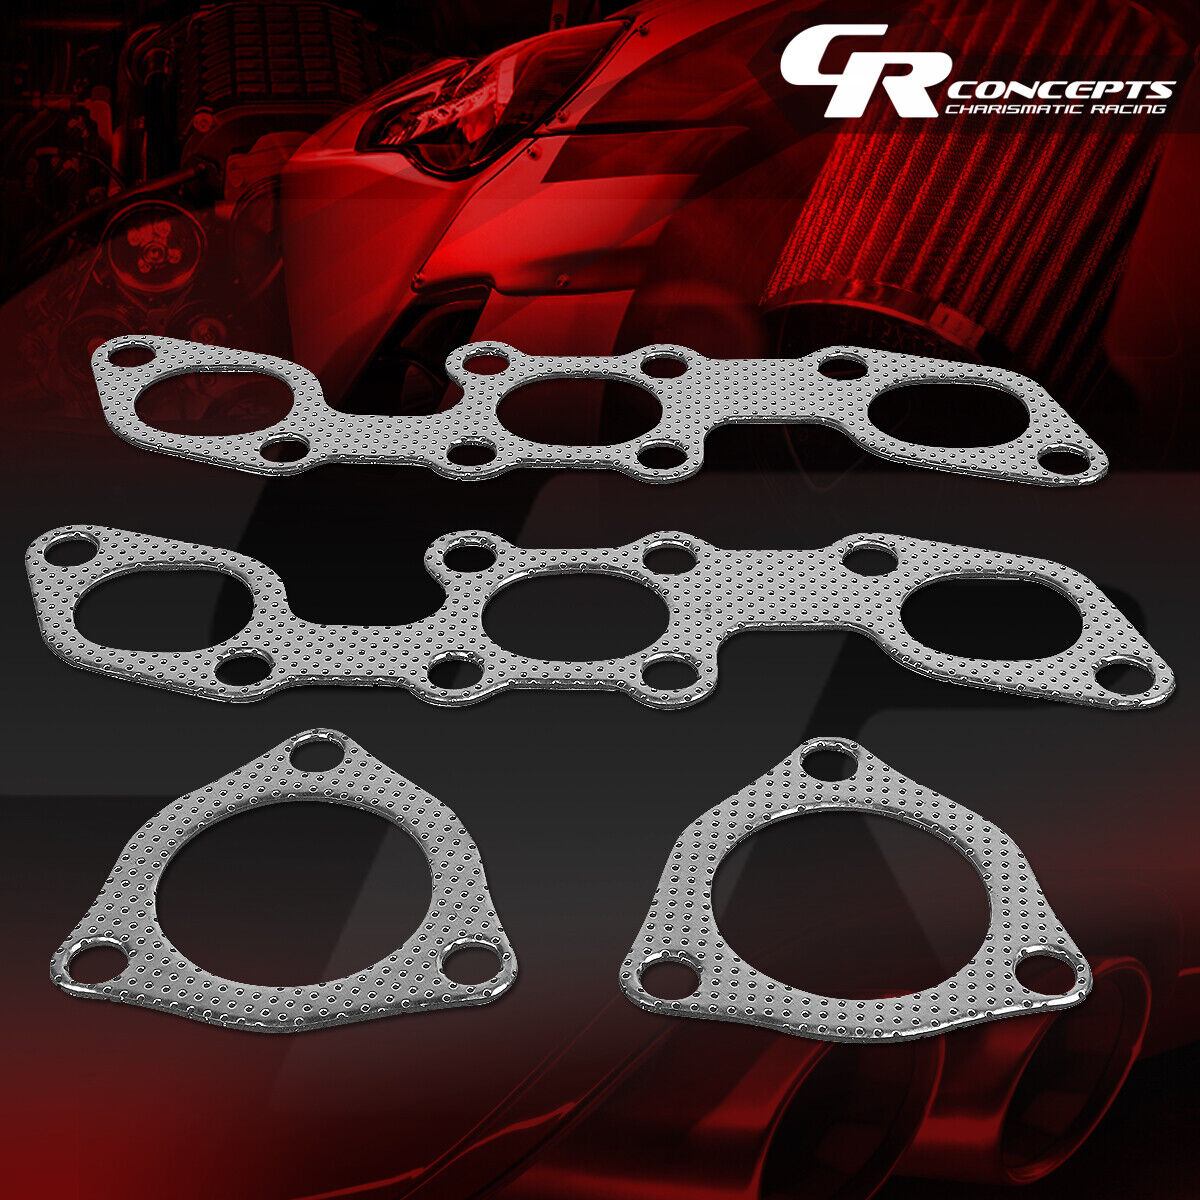 EXHAUST MANIFOLD HEADER GASKET COMPLETE SET FOR 90-96 NISSAN 300ZX 3.0 NON TURBO